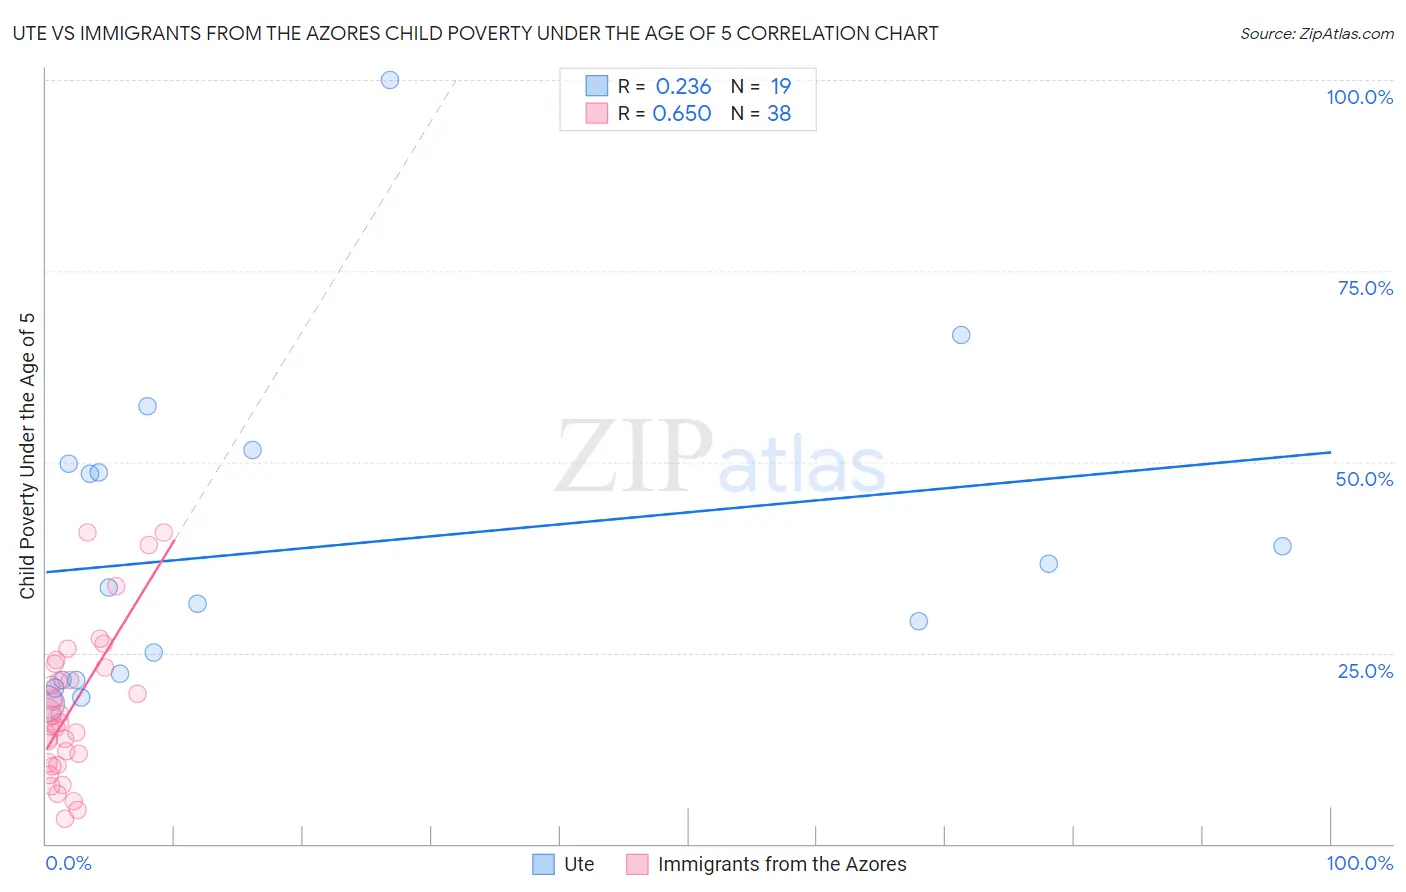 Ute vs Immigrants from the Azores Child Poverty Under the Age of 5